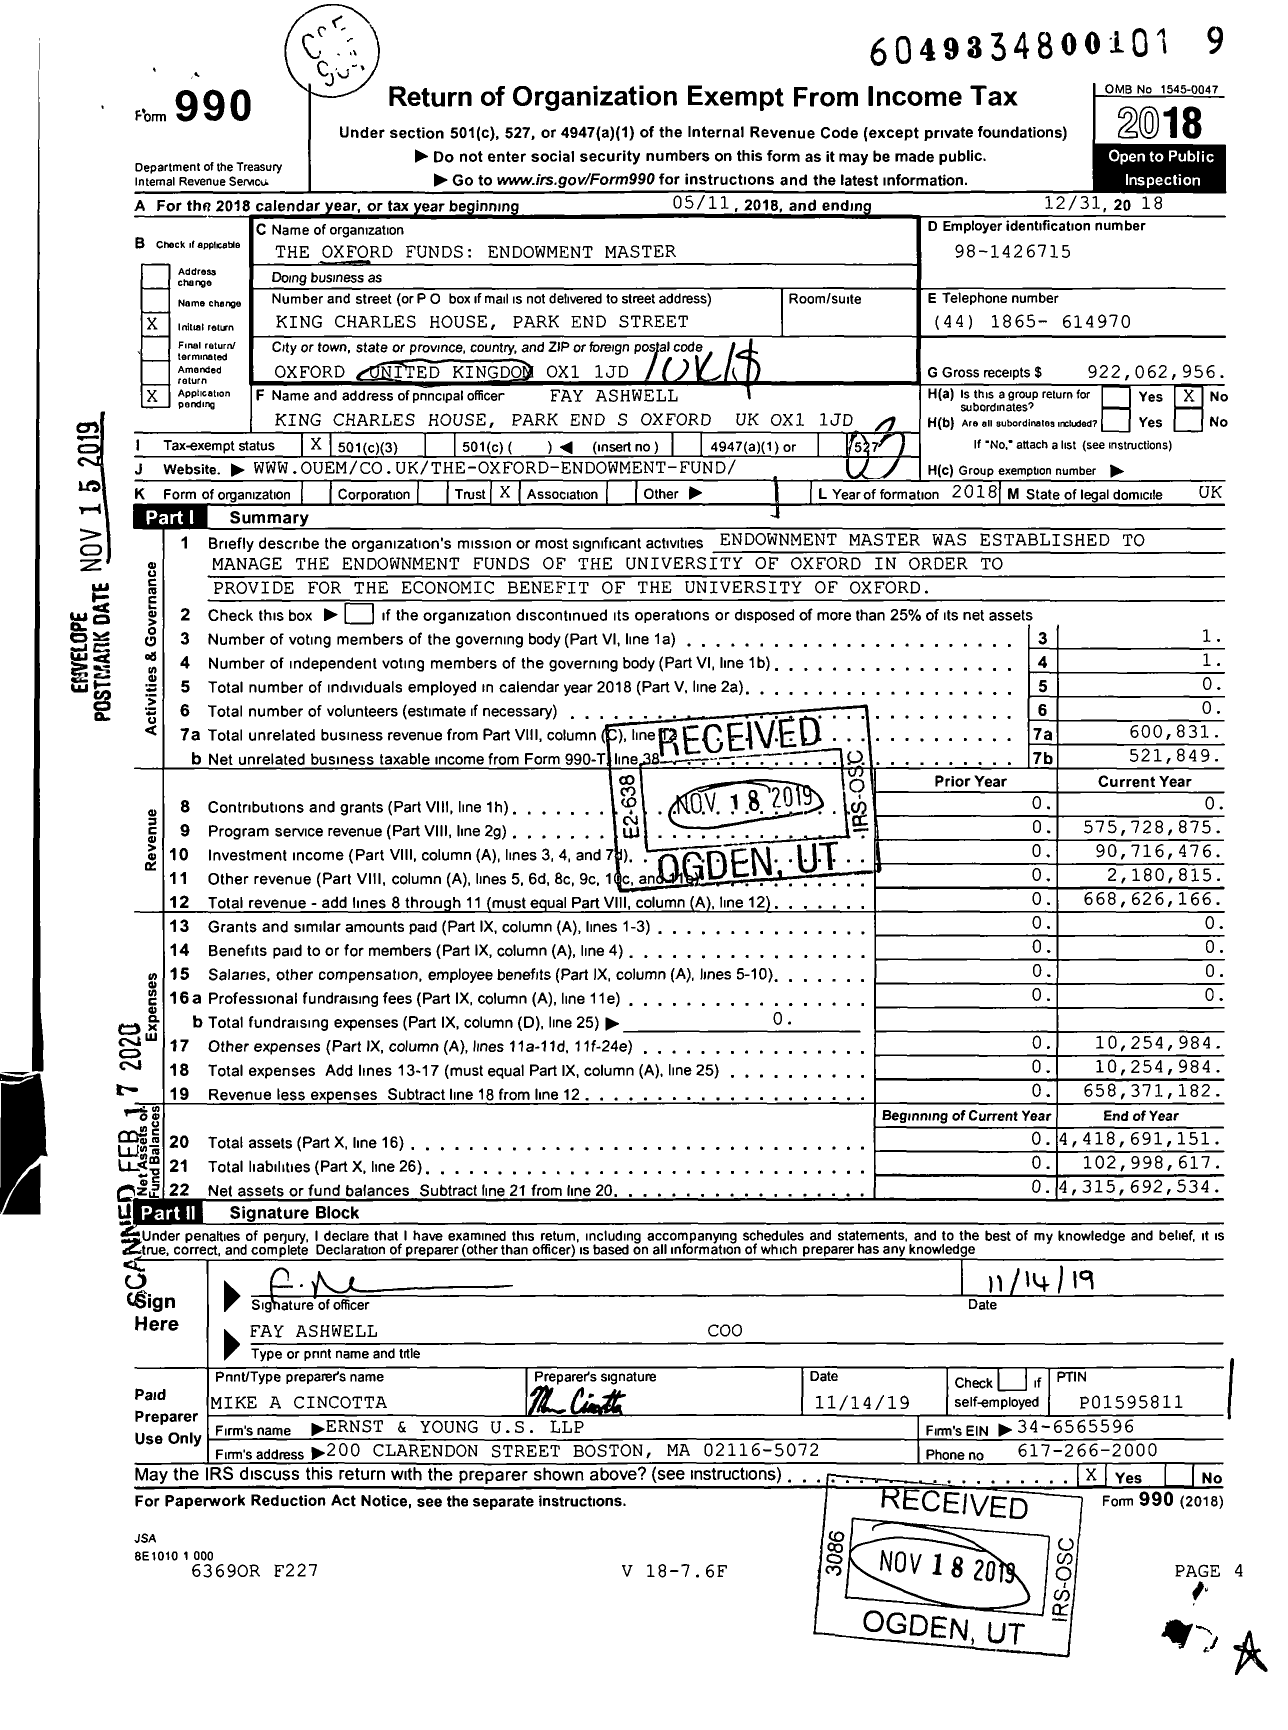 Image of first page of 2018 Form 990 for The Oxford Funds Endowment Master